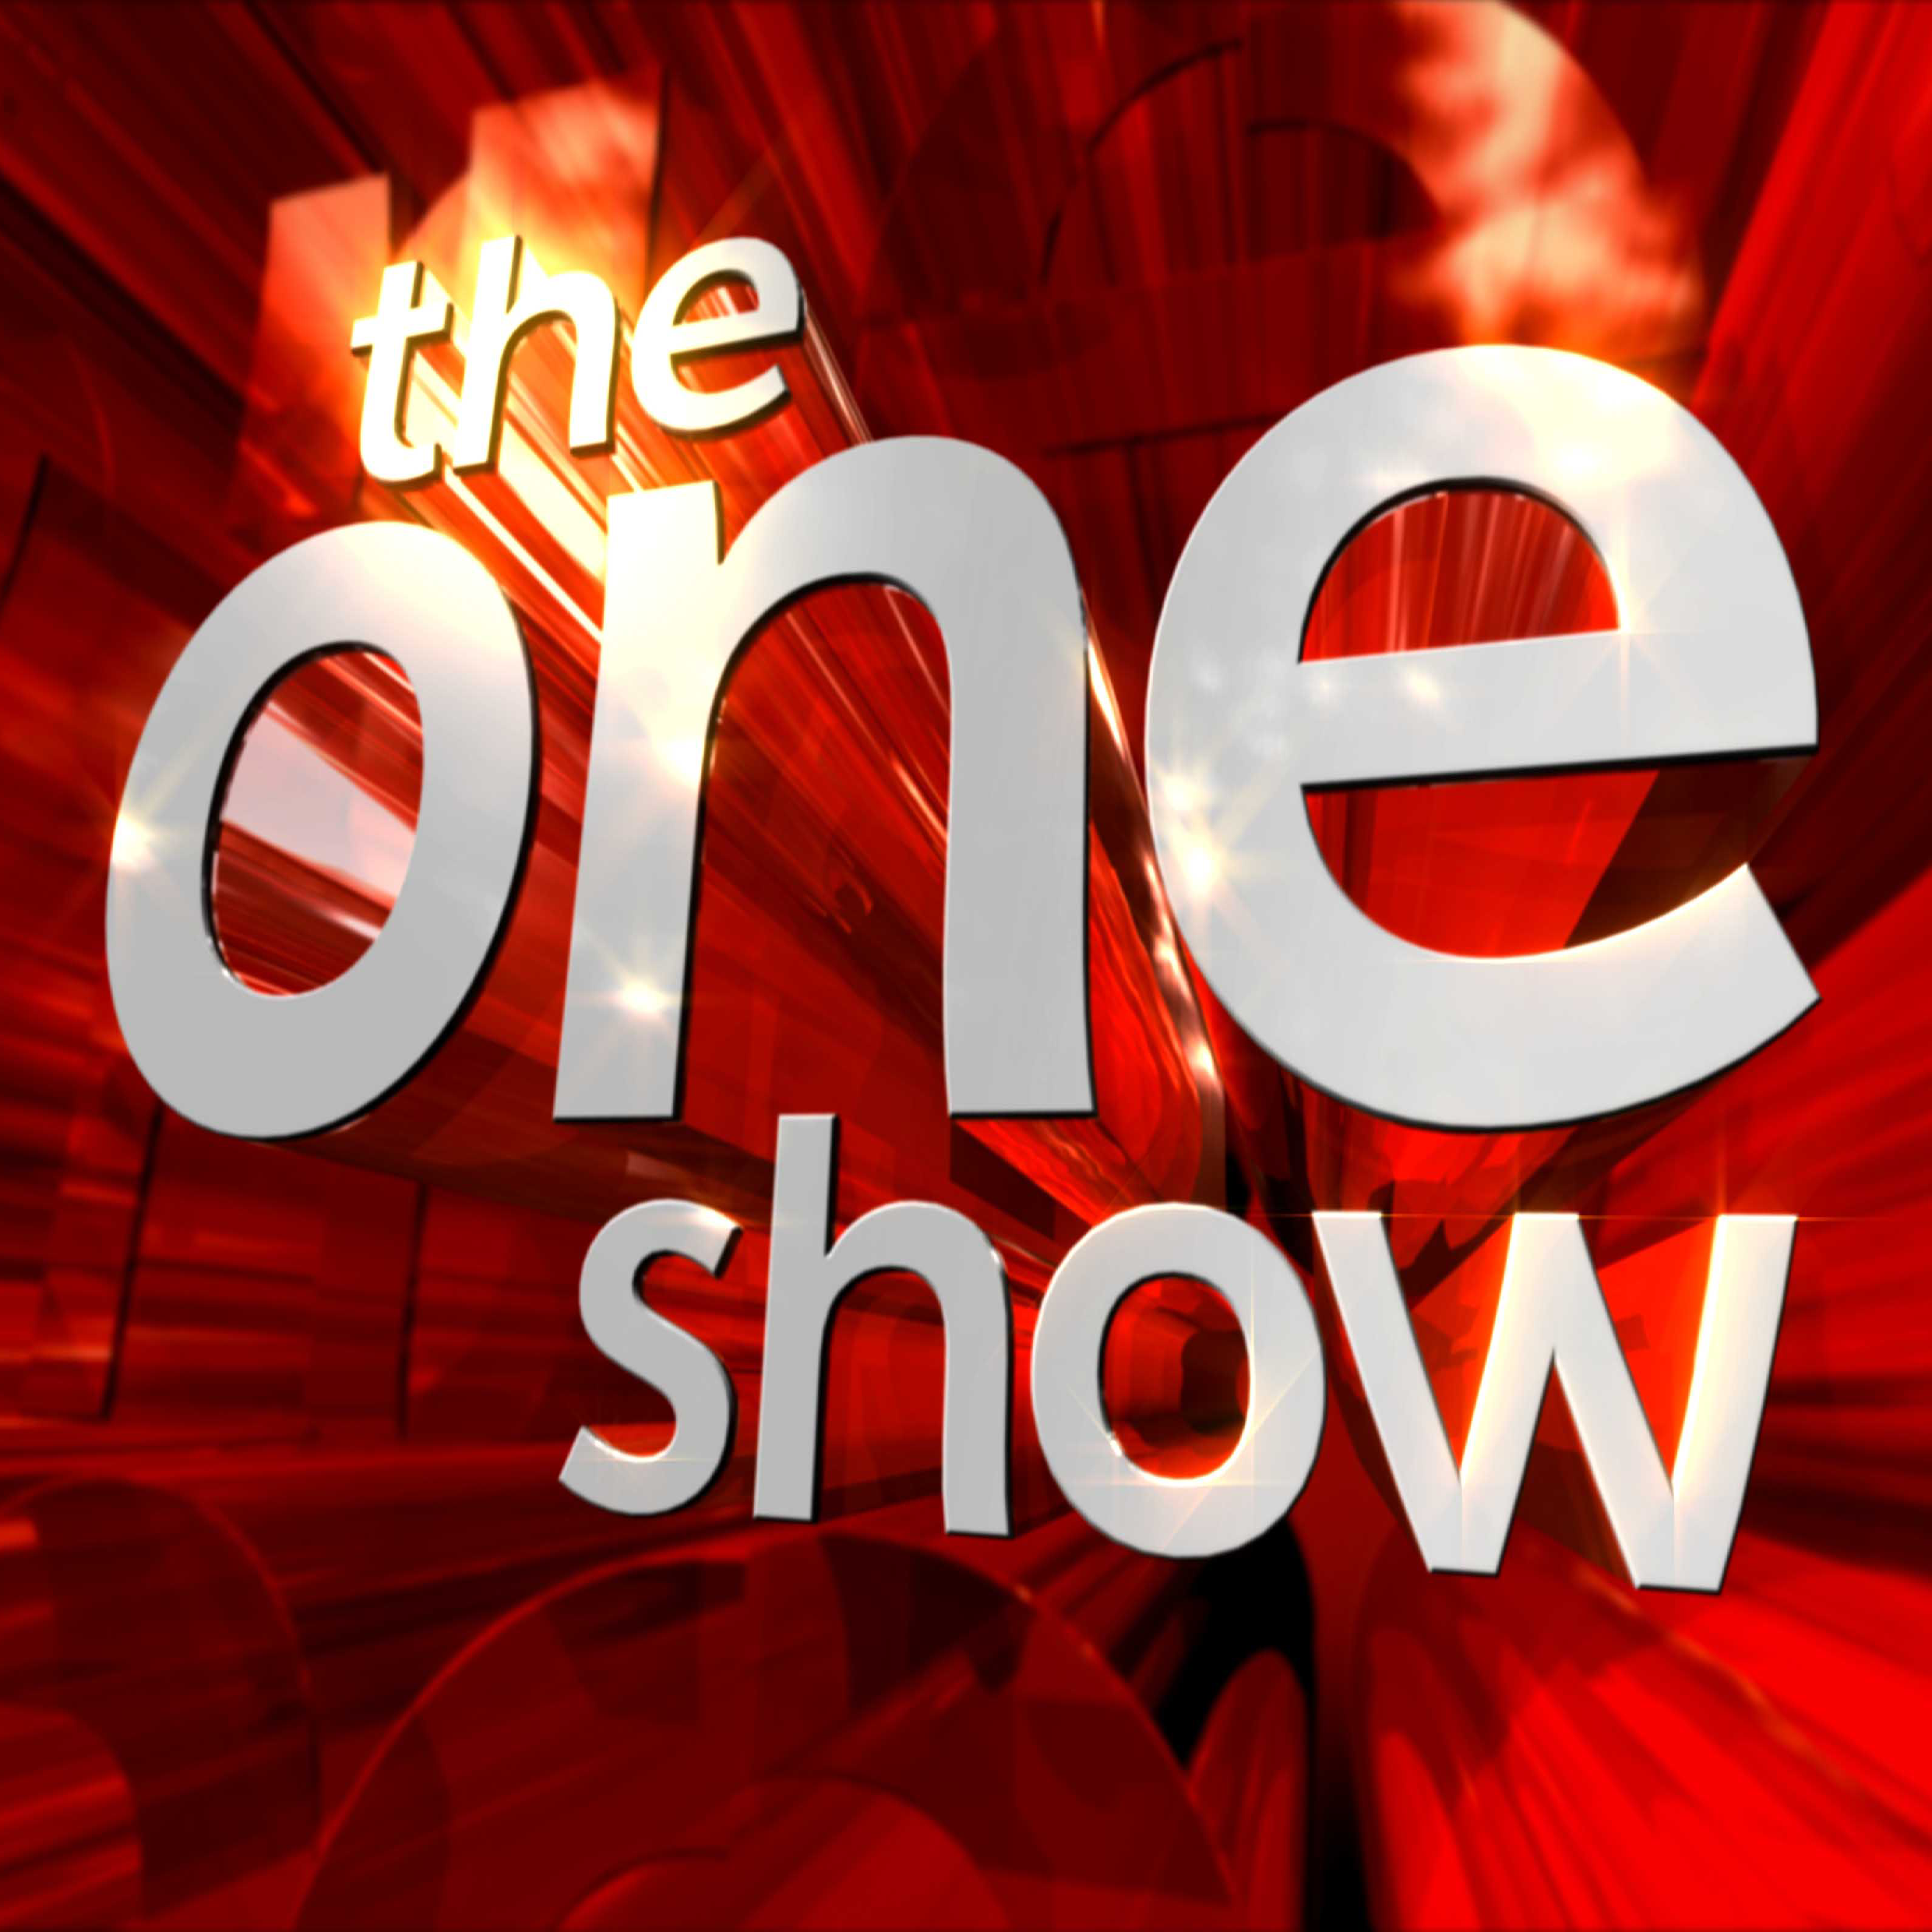 oneshow.png